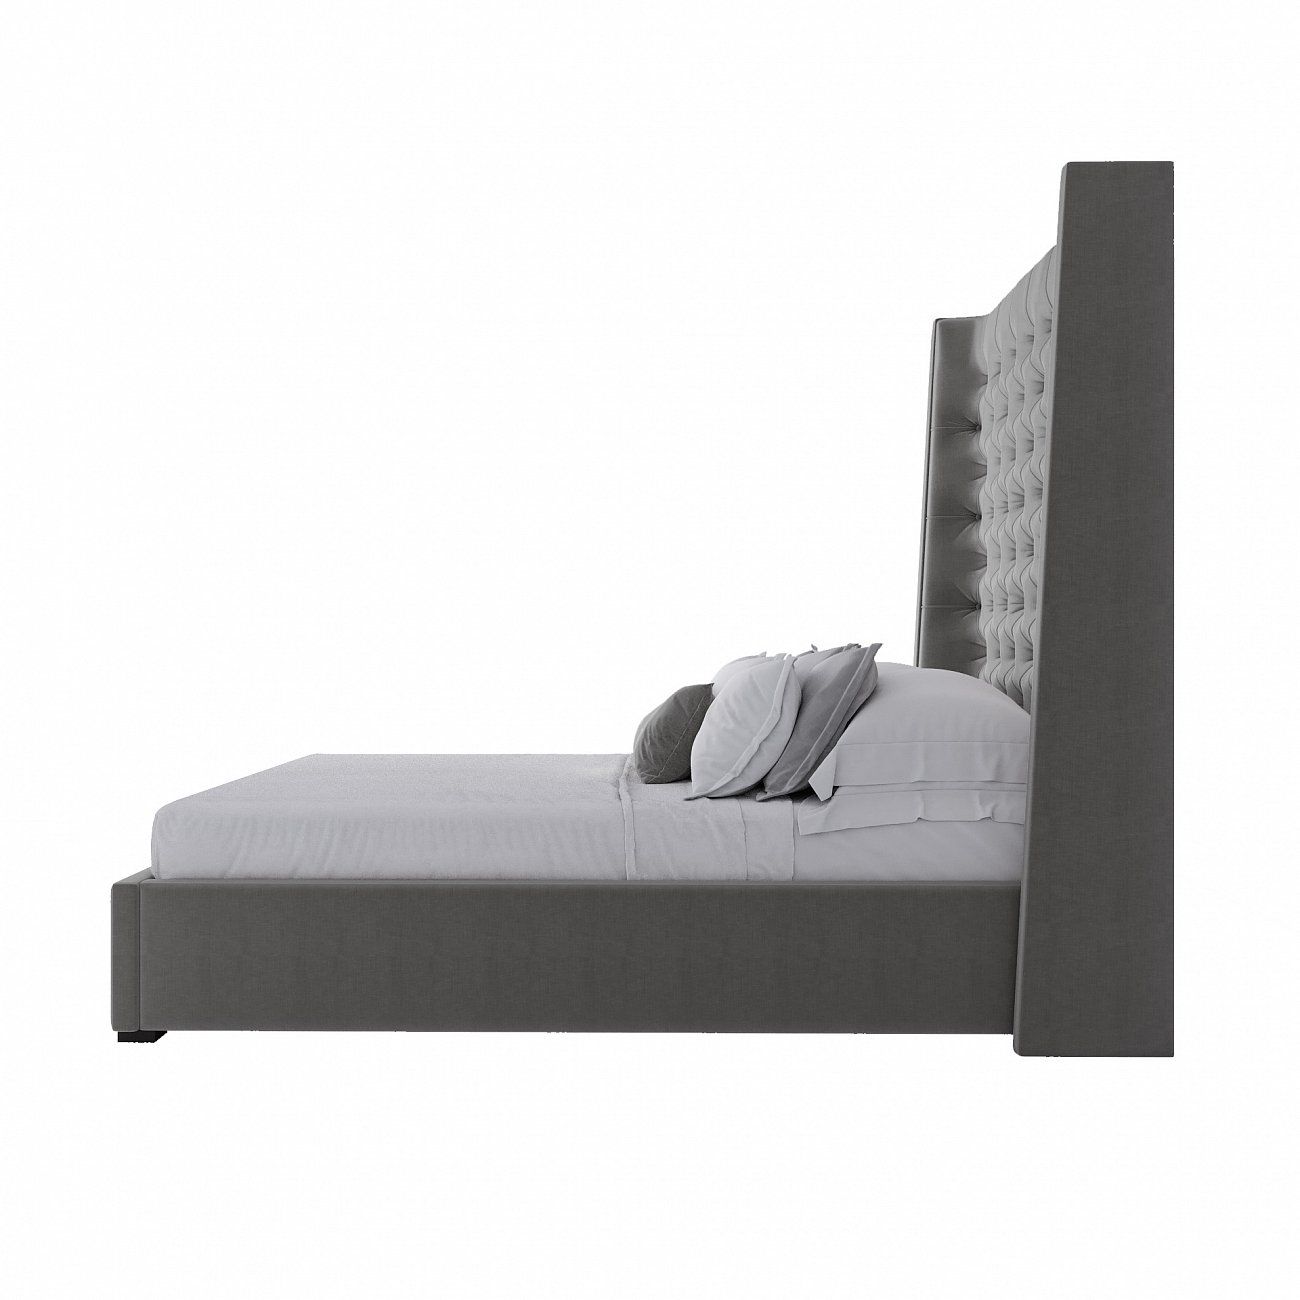 Teenage bed with carriage screed 140x200 cm grey Jackie King